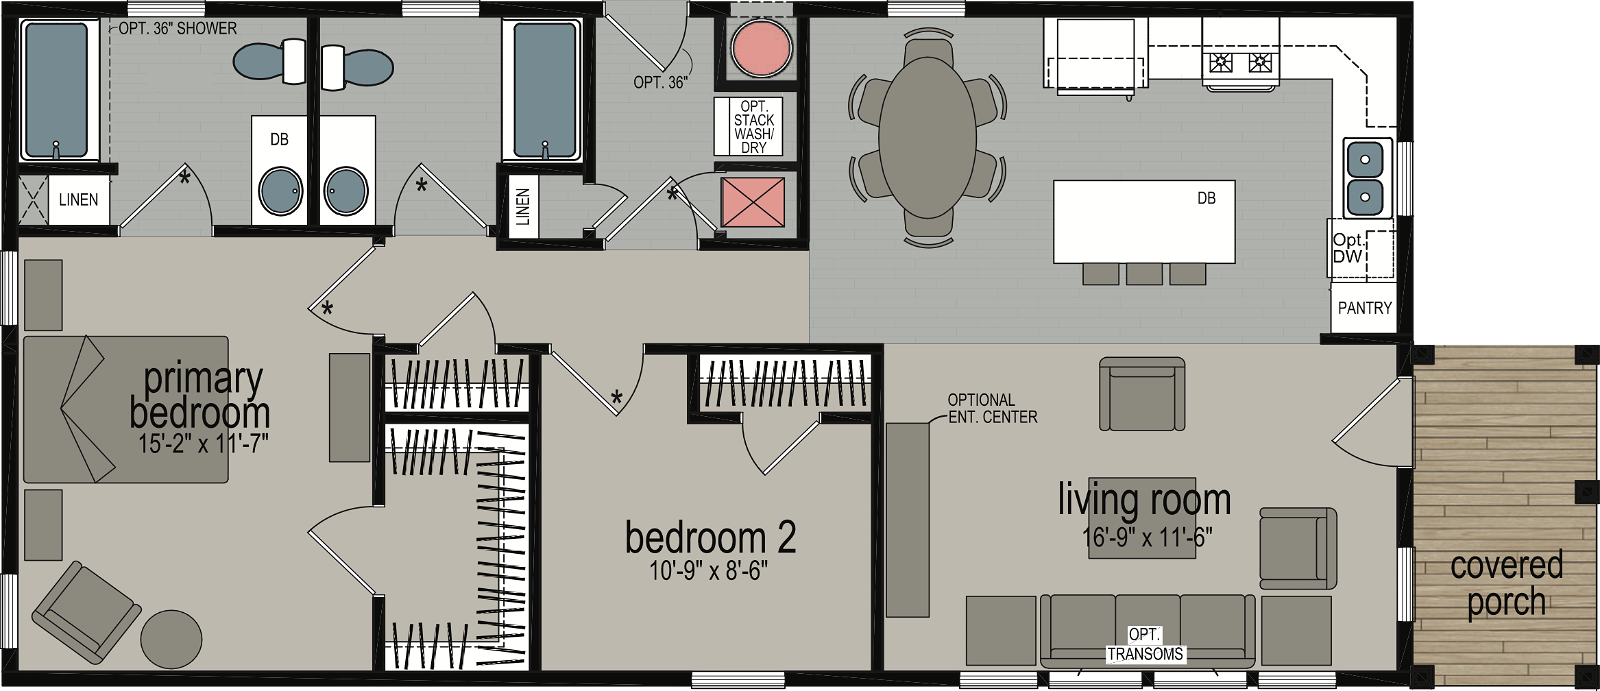 Avila floor plan cropped and hero home features